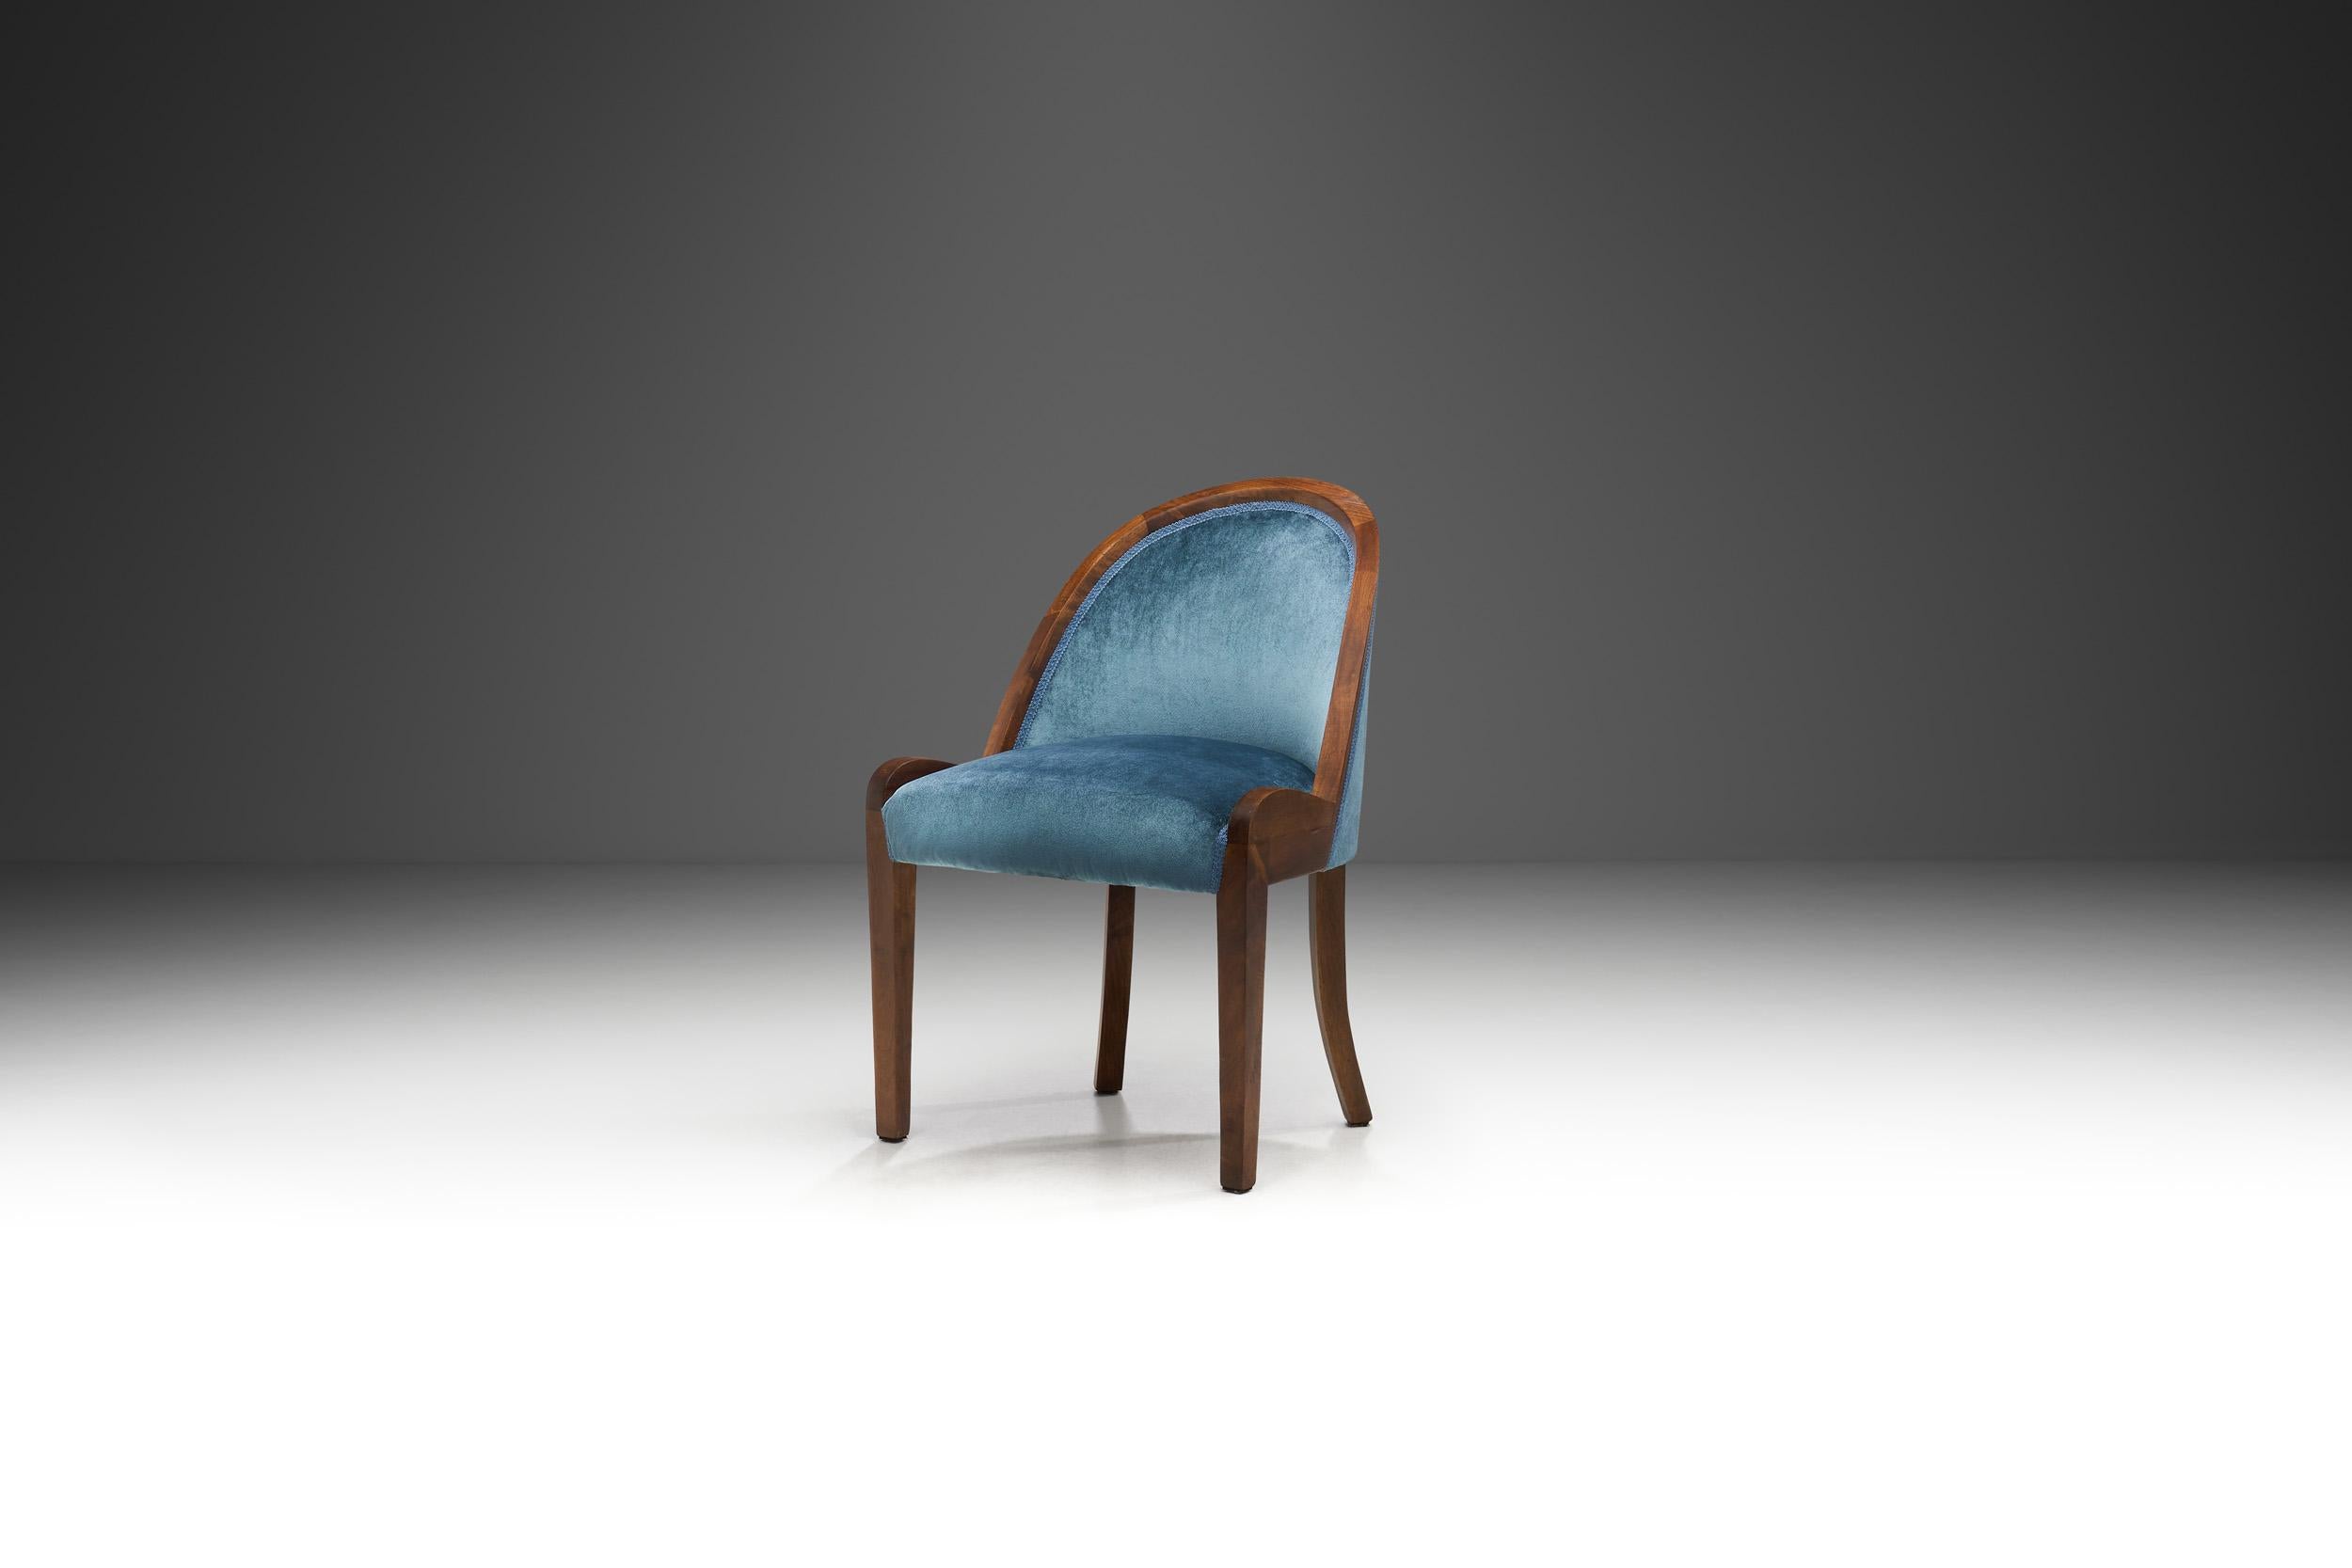 Slipper chairs received their name during the Victorian era, when they were used to comfortably seat high-class women while they put on their shoes or slippers. Evident with this beautiful blue chair, slipper chairs usually lack arms and sit low to